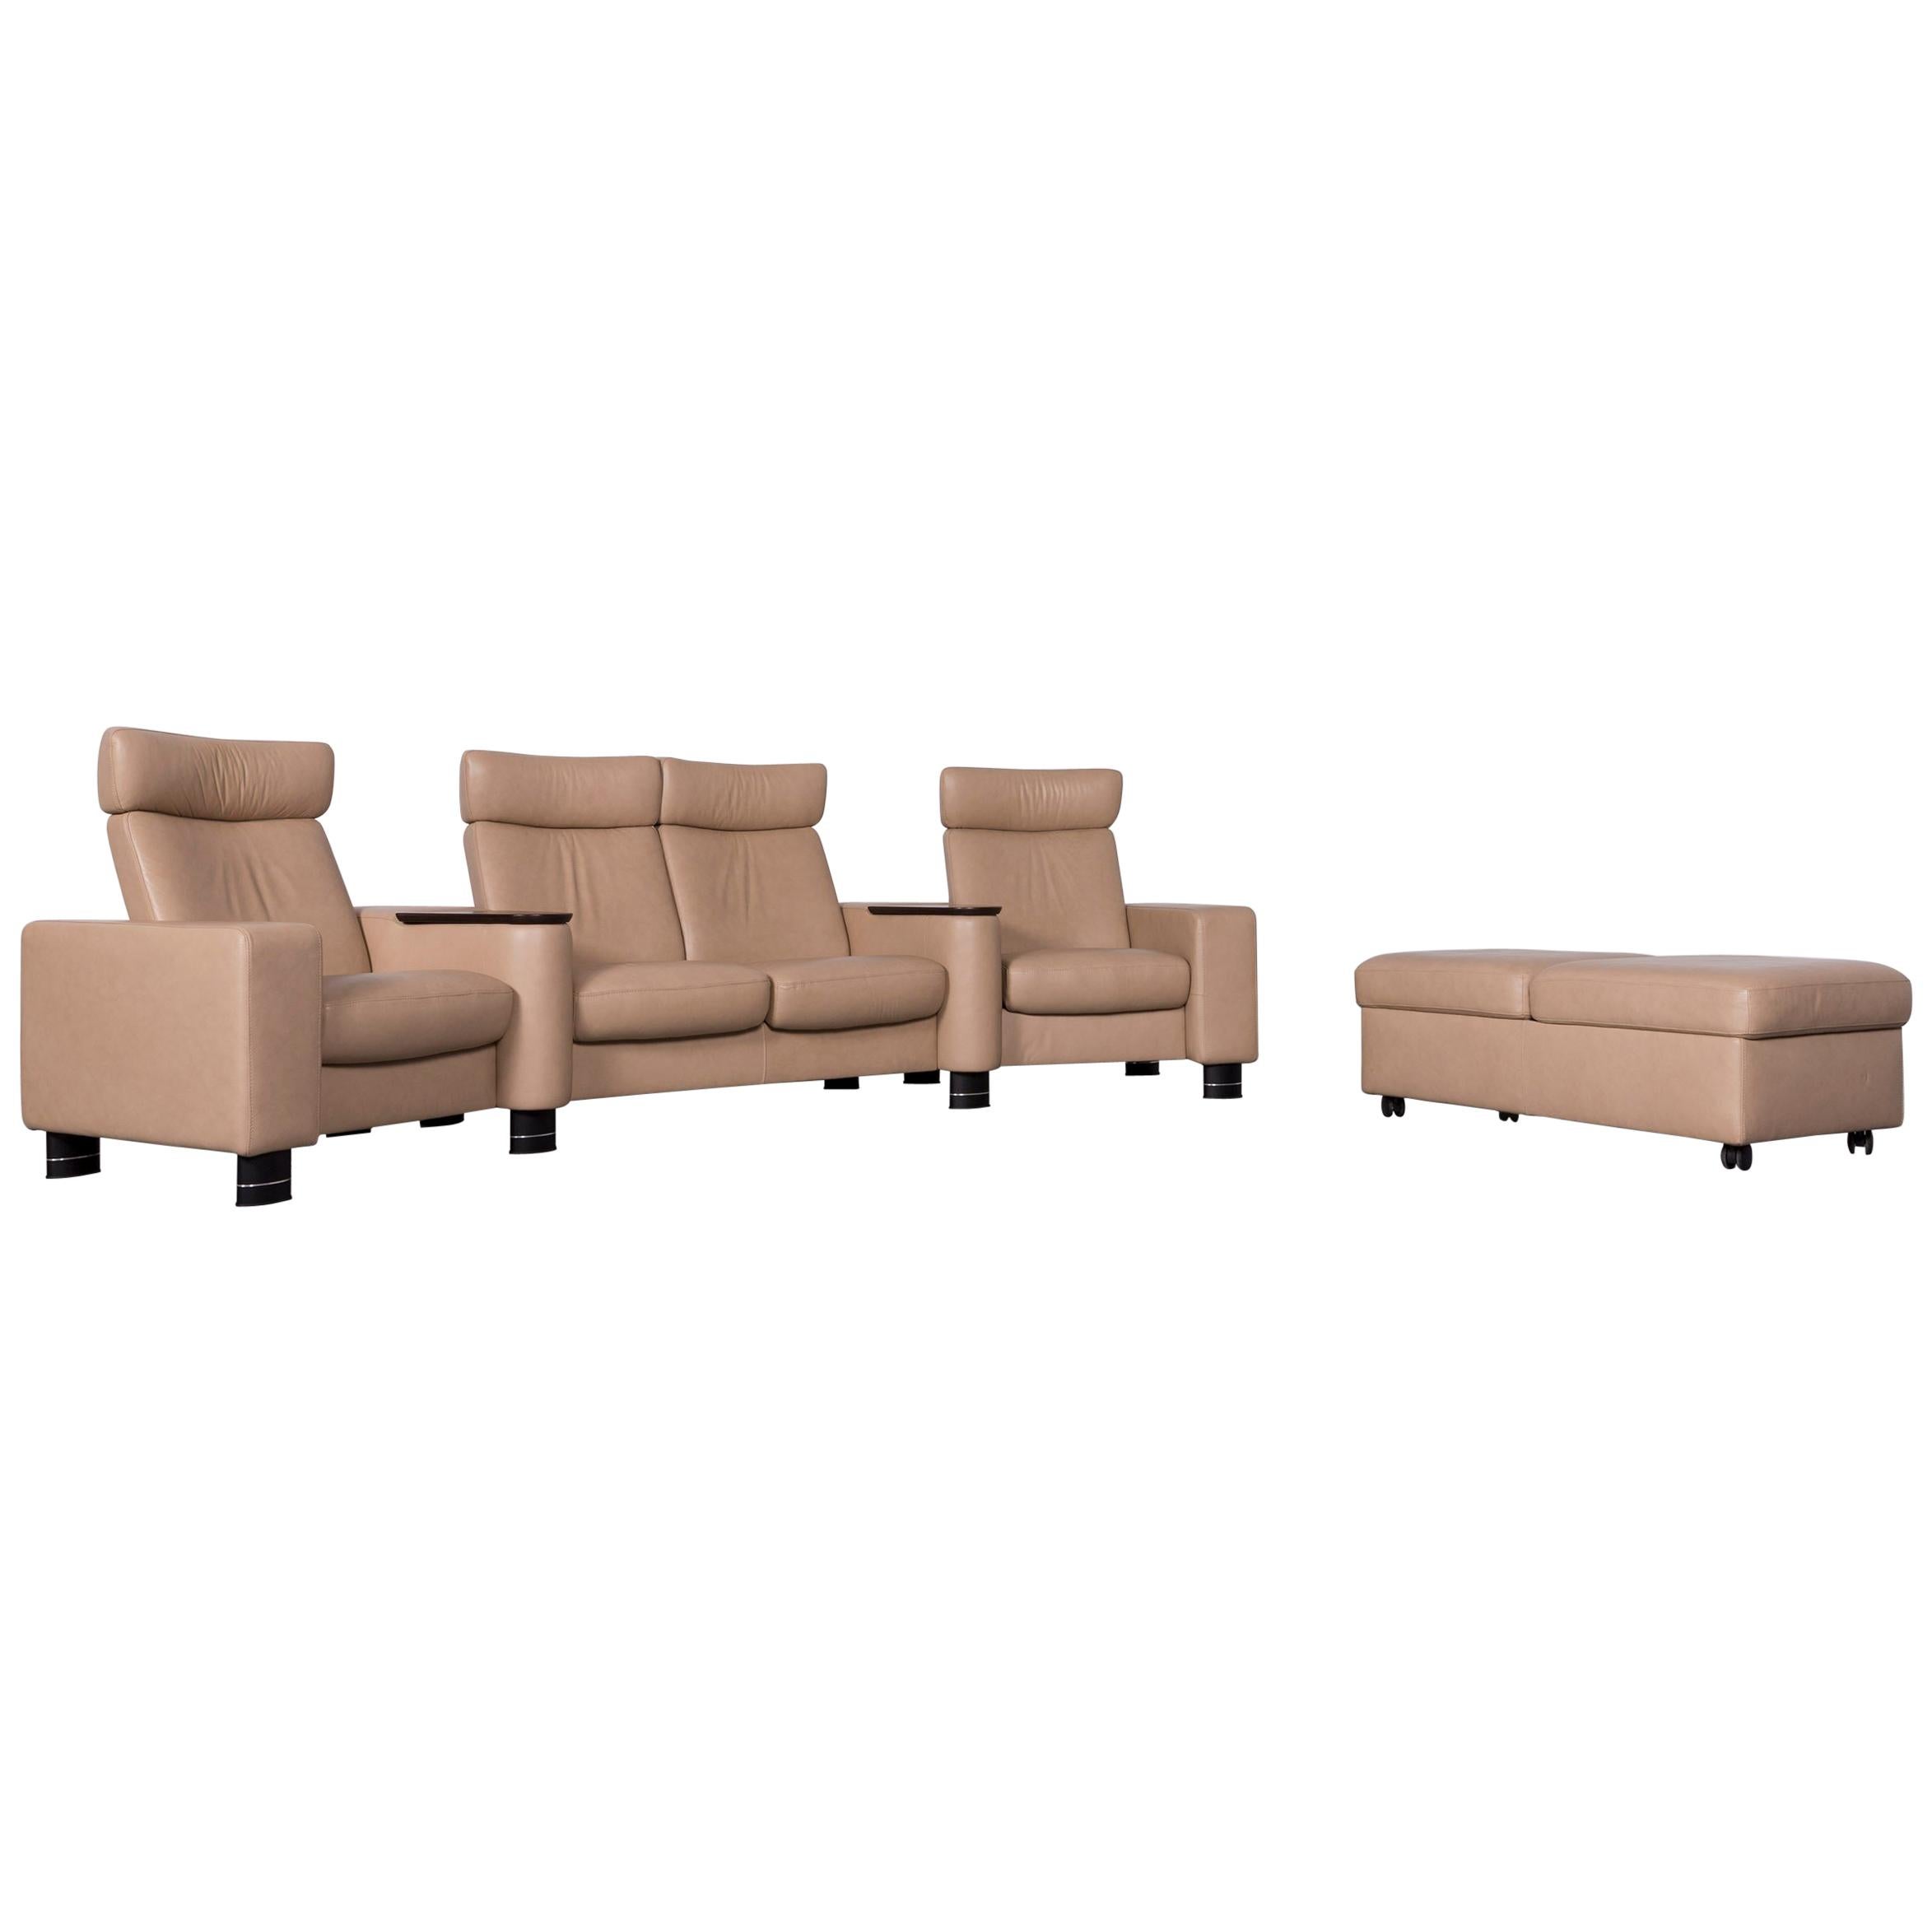 Ekornes Stressless Designer Leather Sofa Beige Four-Seat Recliner Couch  For Sale